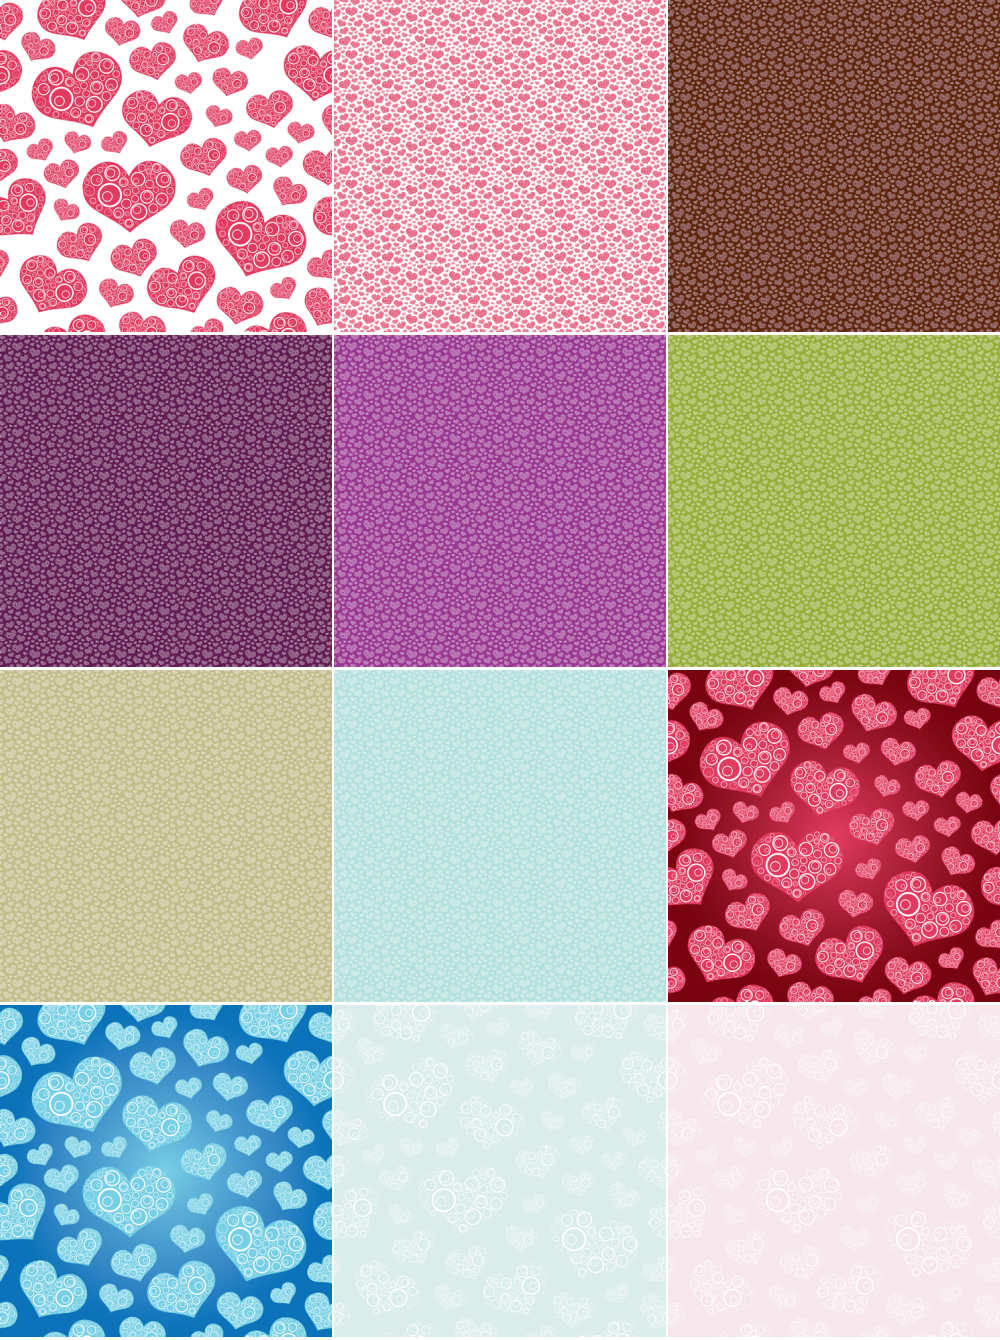 Seamless Hearts Pattern Background Vector